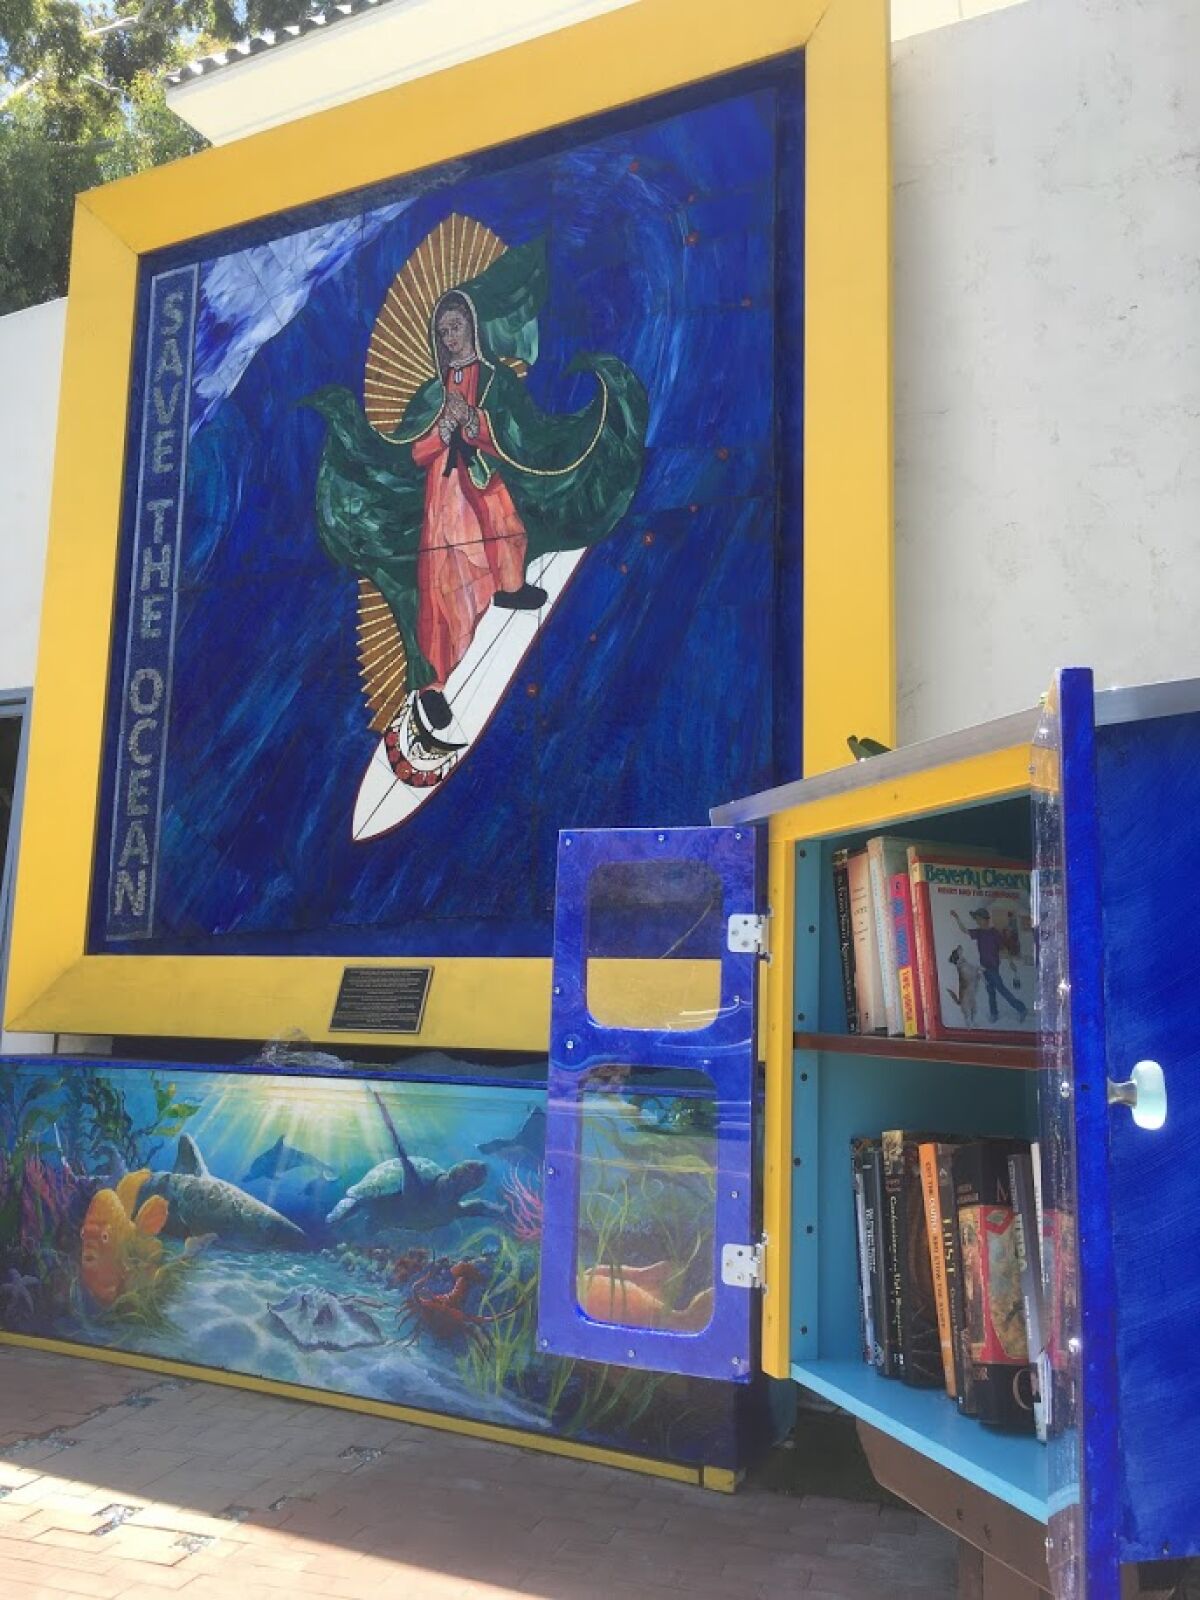 The new Little Free Library is located at the corner of Highway 101 and Encinitas Boulevard behind Leucadia Pizzeria.